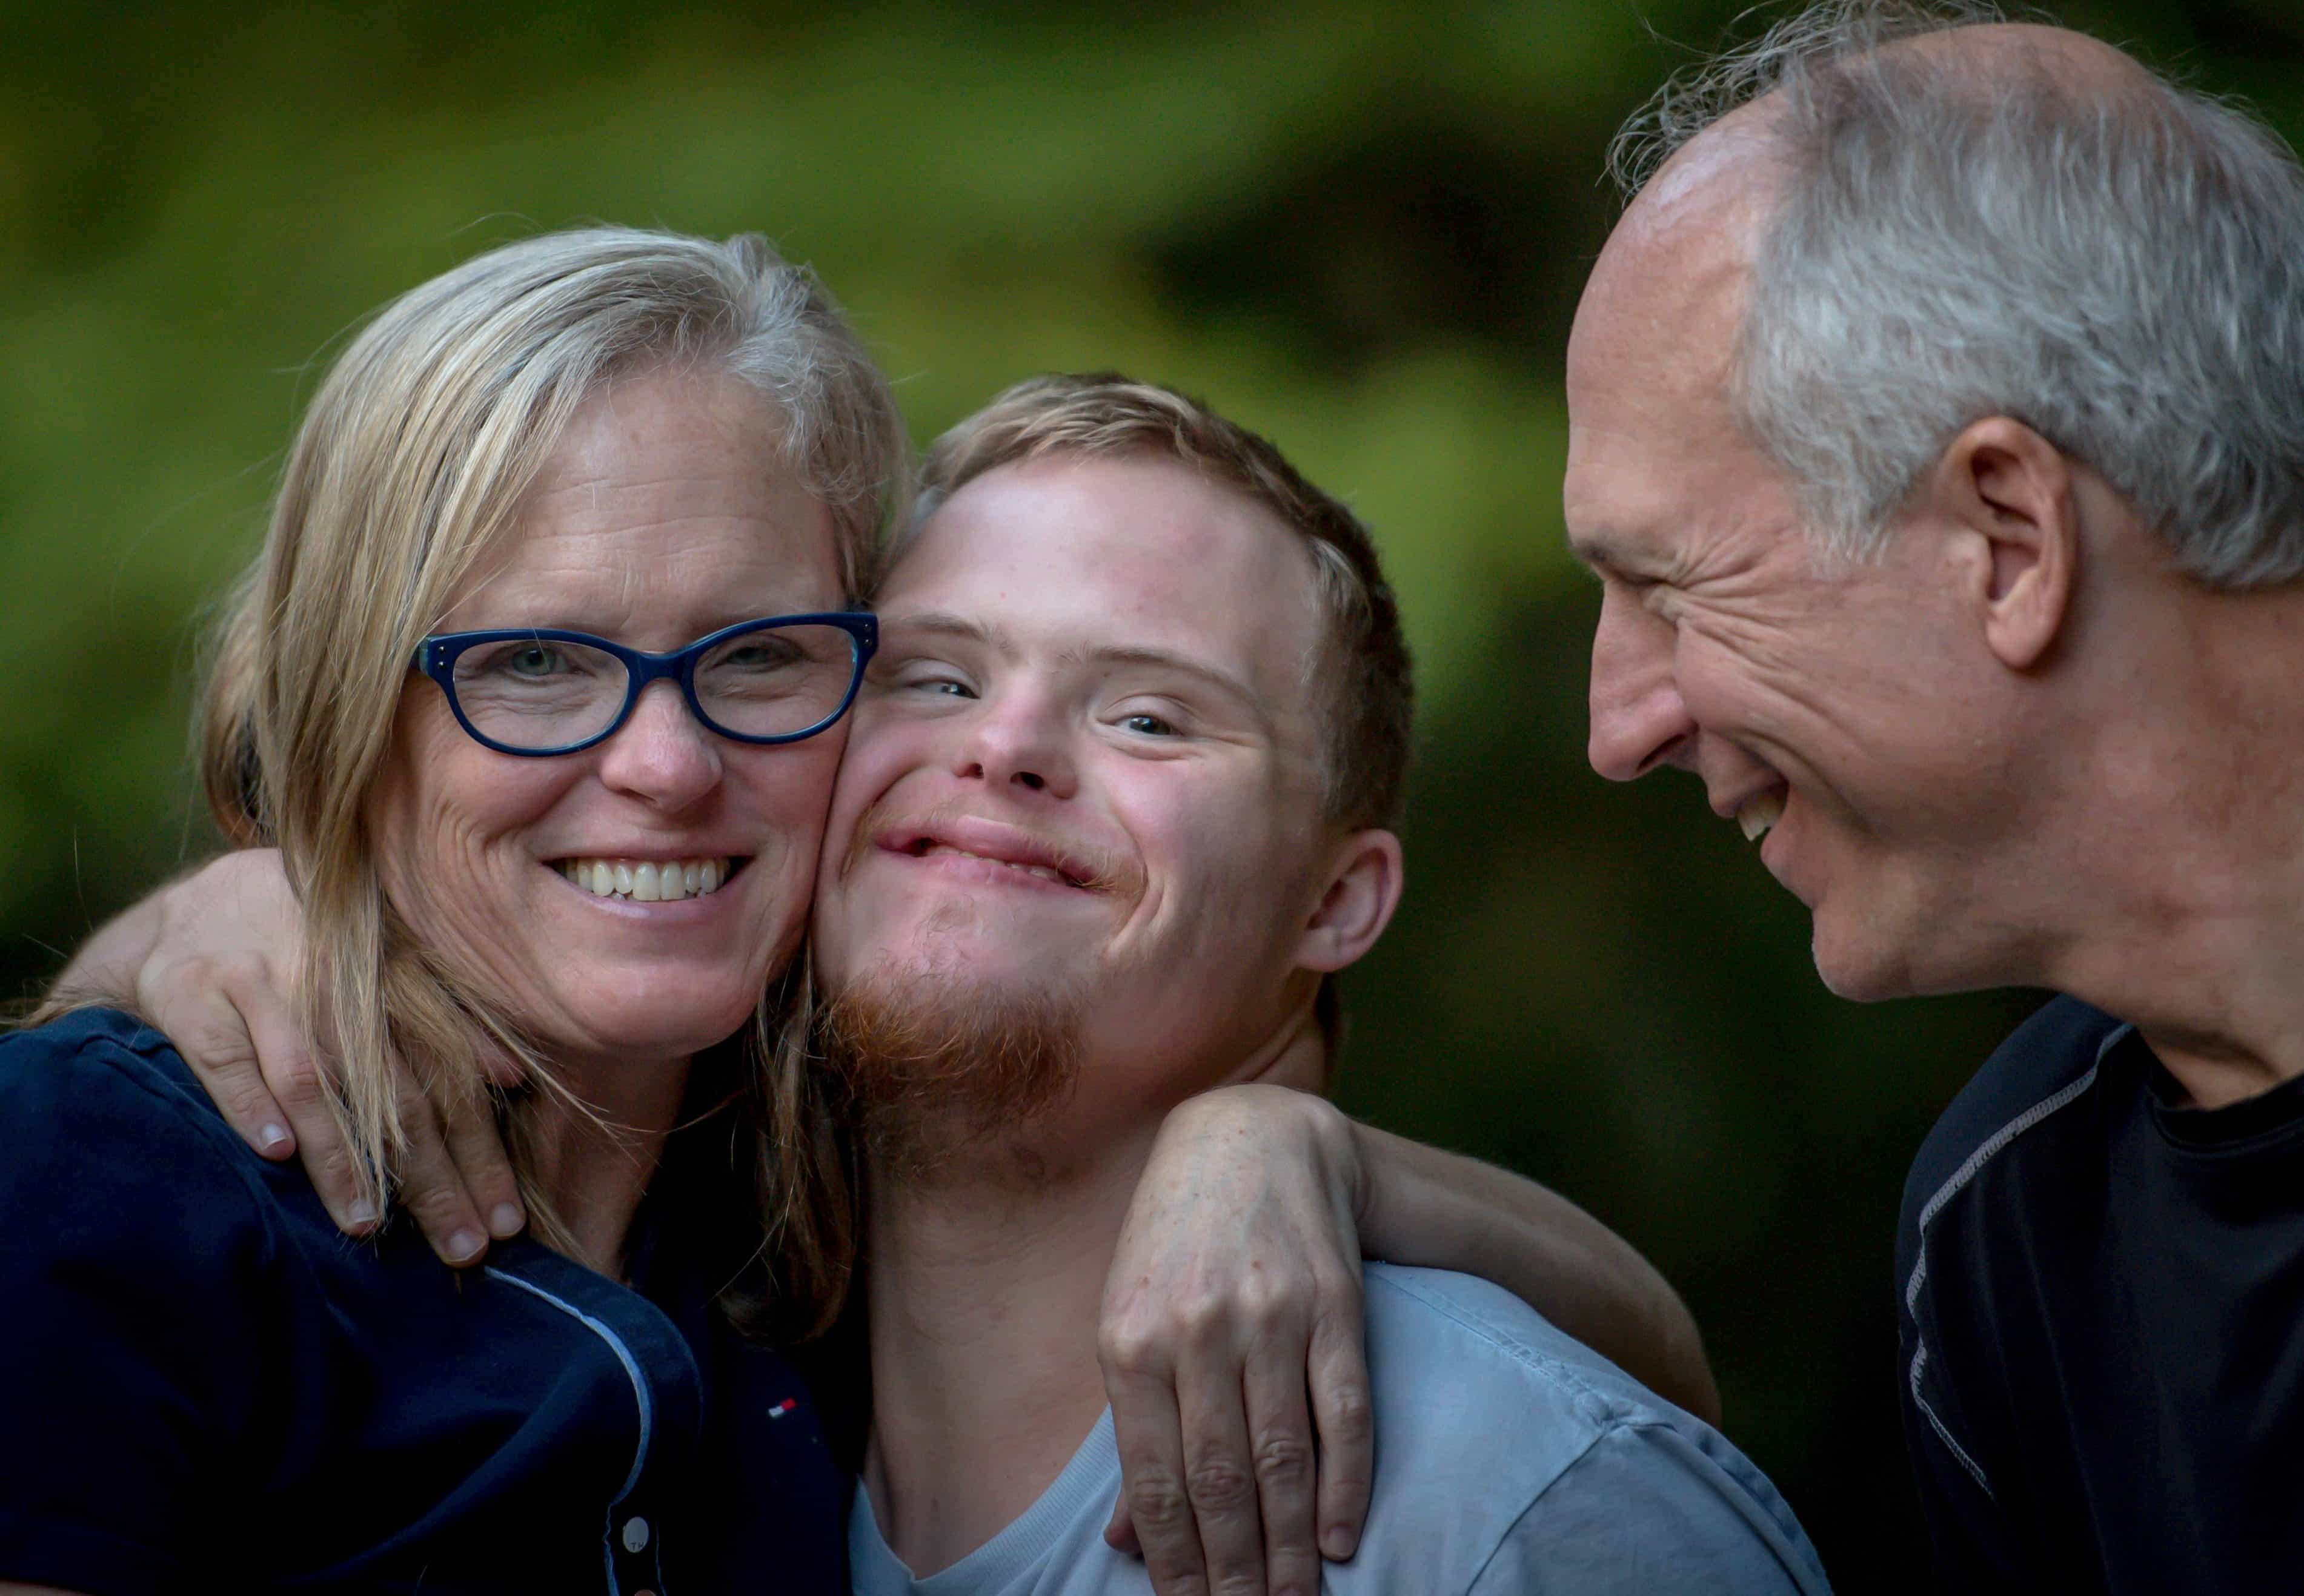 Close up of smiling middle-age couple with mom having a side hug with their grown, special needs son